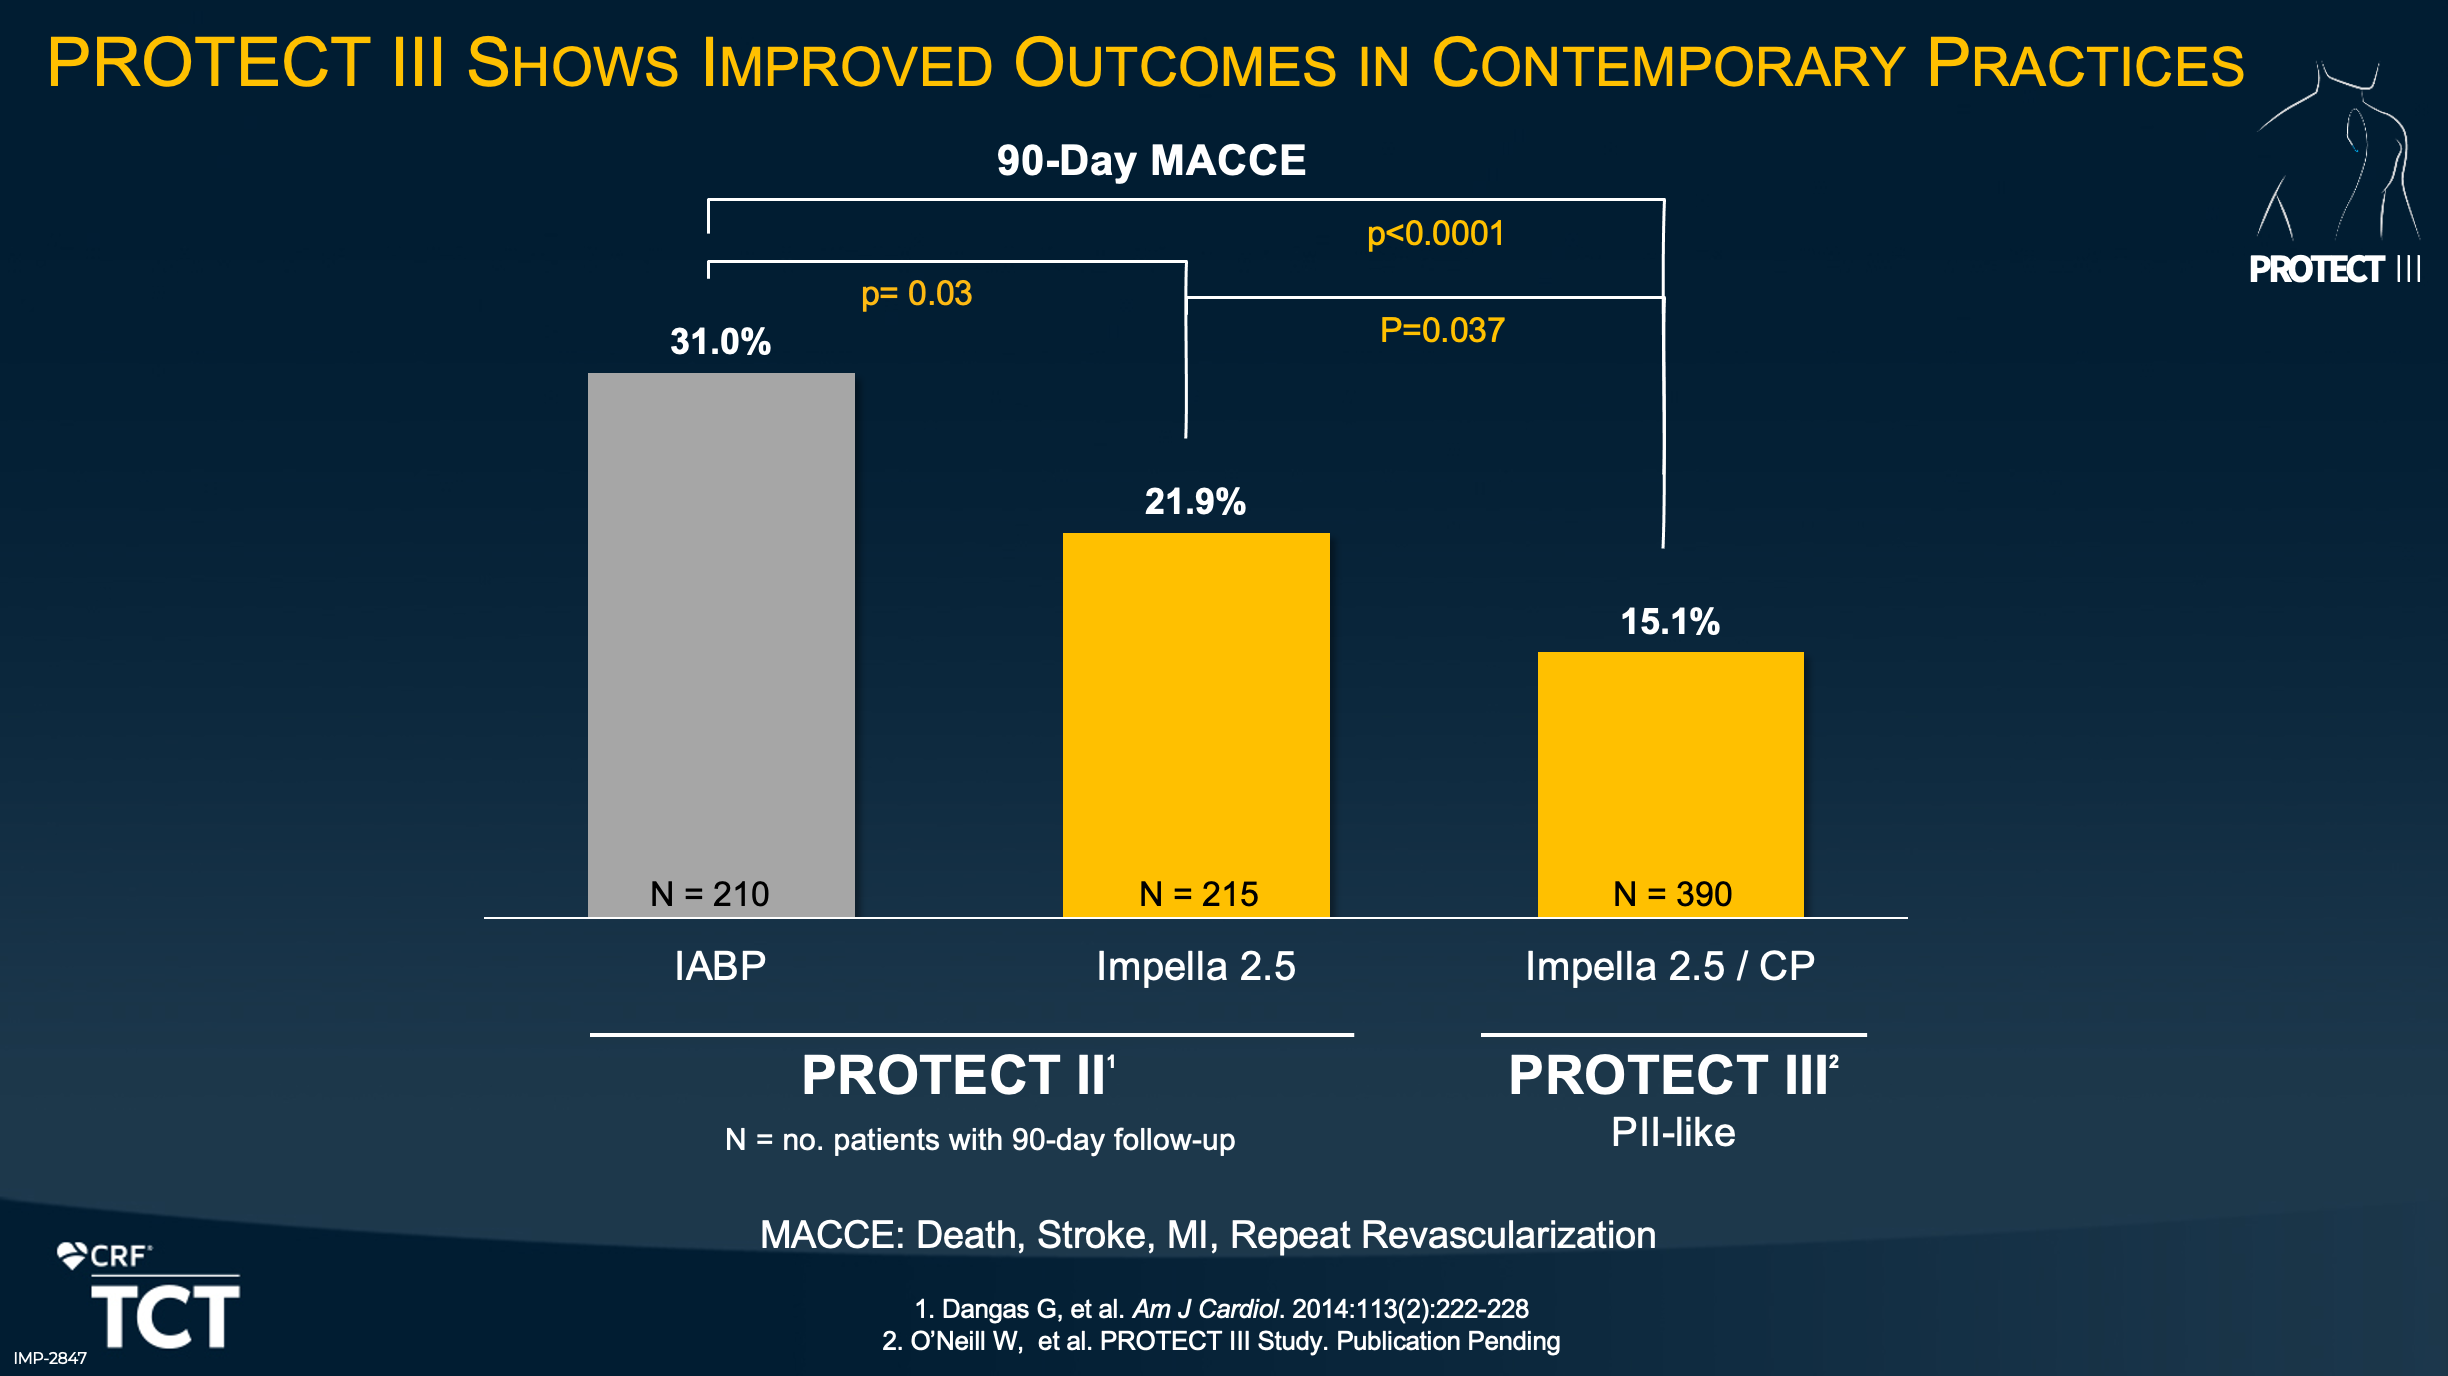 TCT Slide about PROTECT III Shows Improved Outcomes in Contemporary Practices